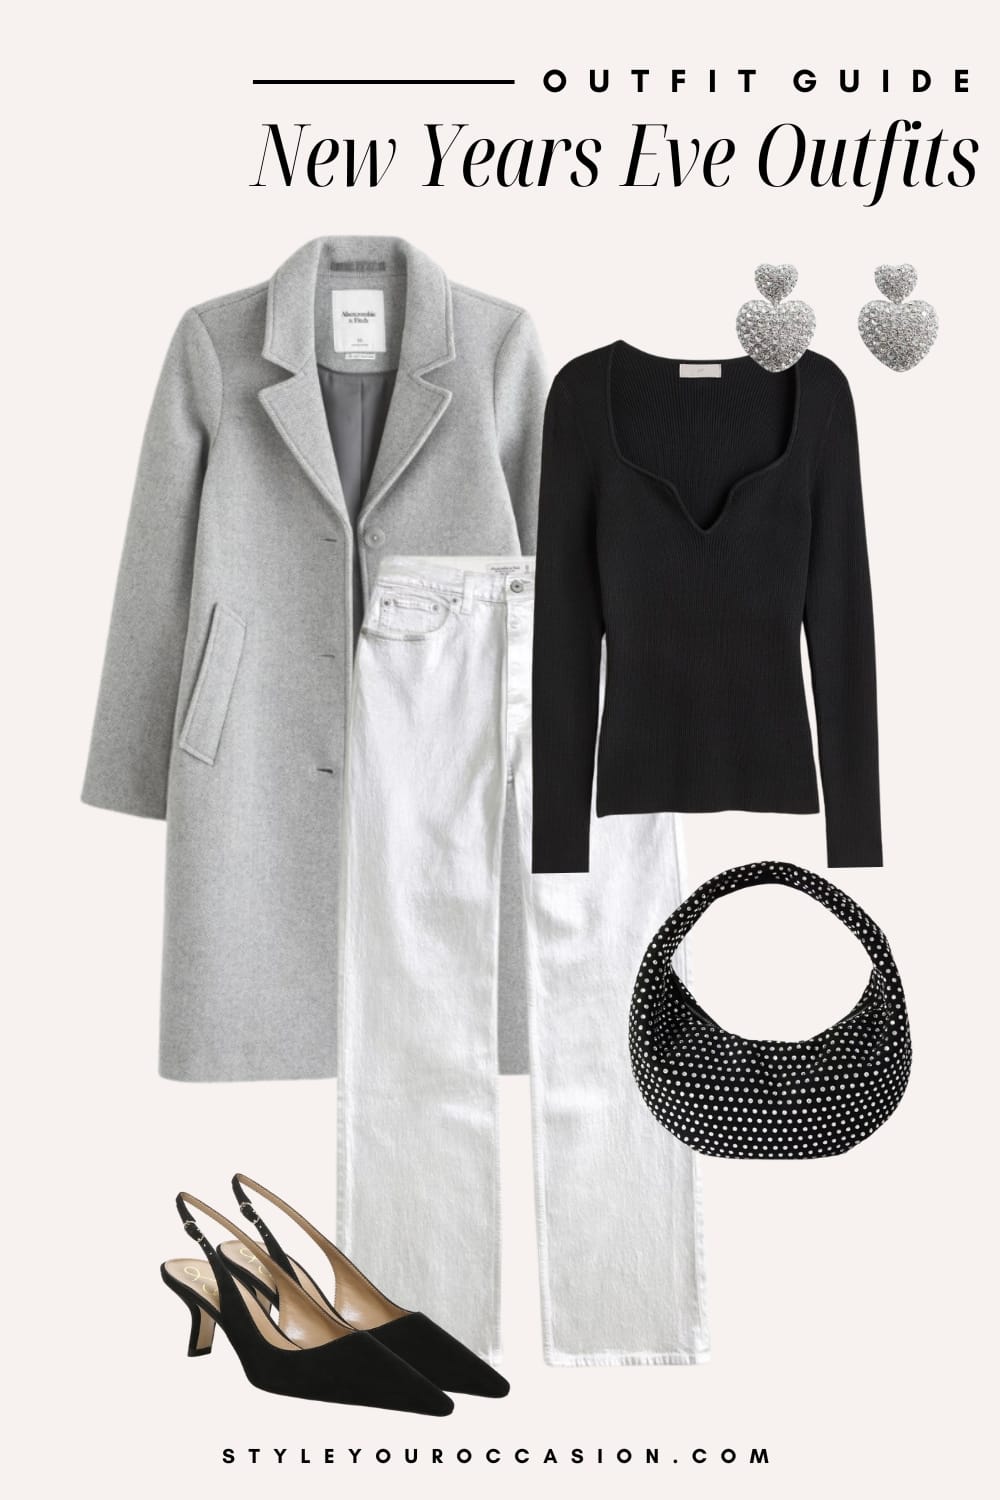 An image board of a New Year's Eve outfit featuring silver pants, a black sweater, a long grey wool coat, black slingback heels, and a rhinestone covered purse